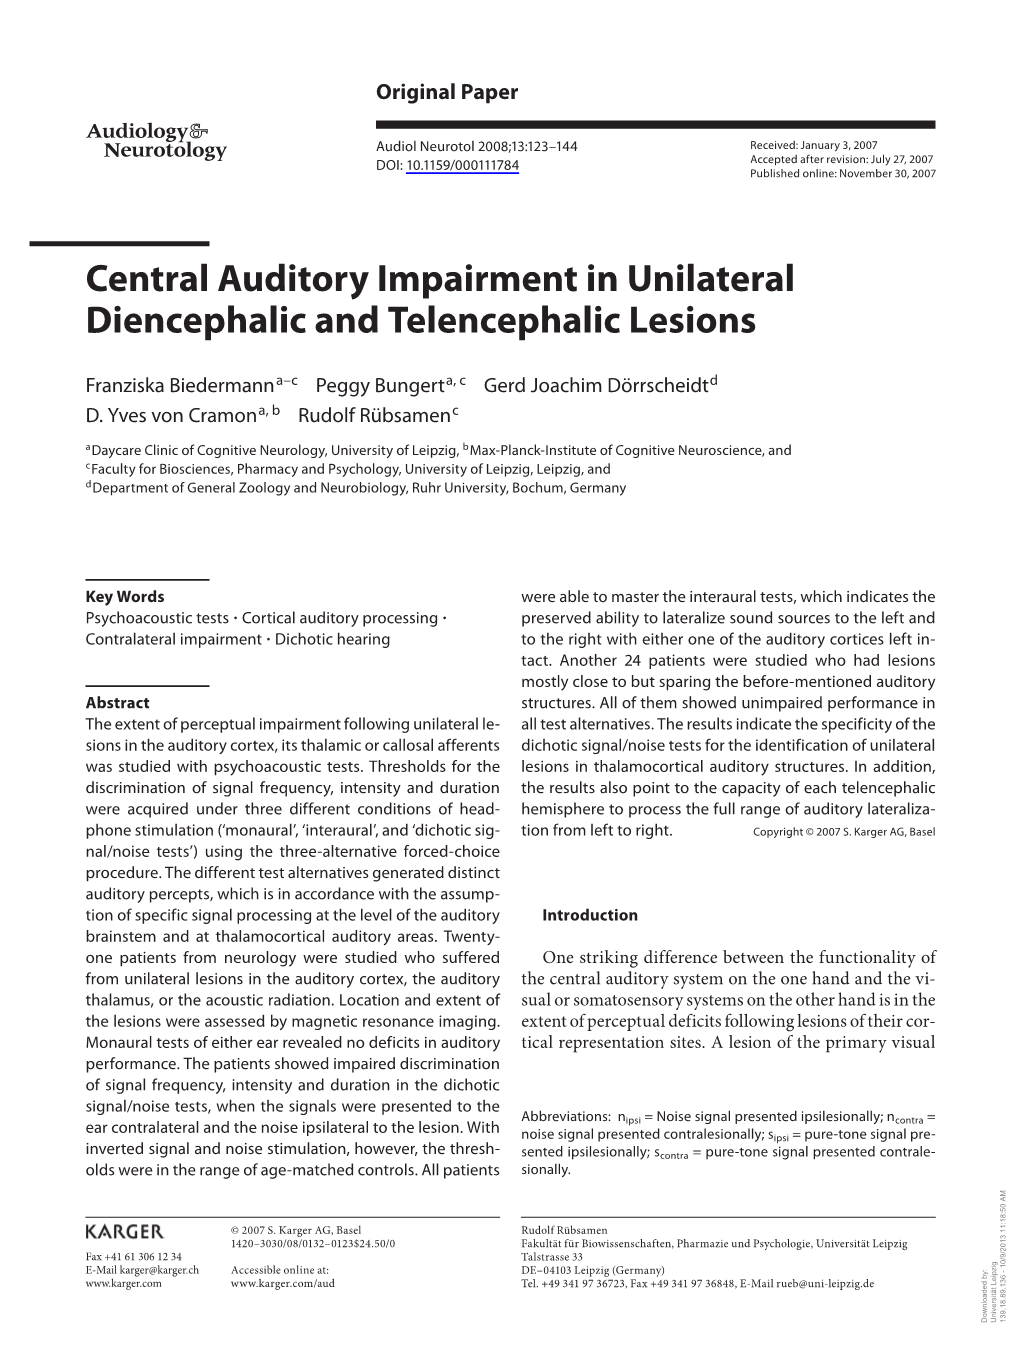 Central Auditory Impairment in Unilateral Diencephalic and Telencephalic Lesions